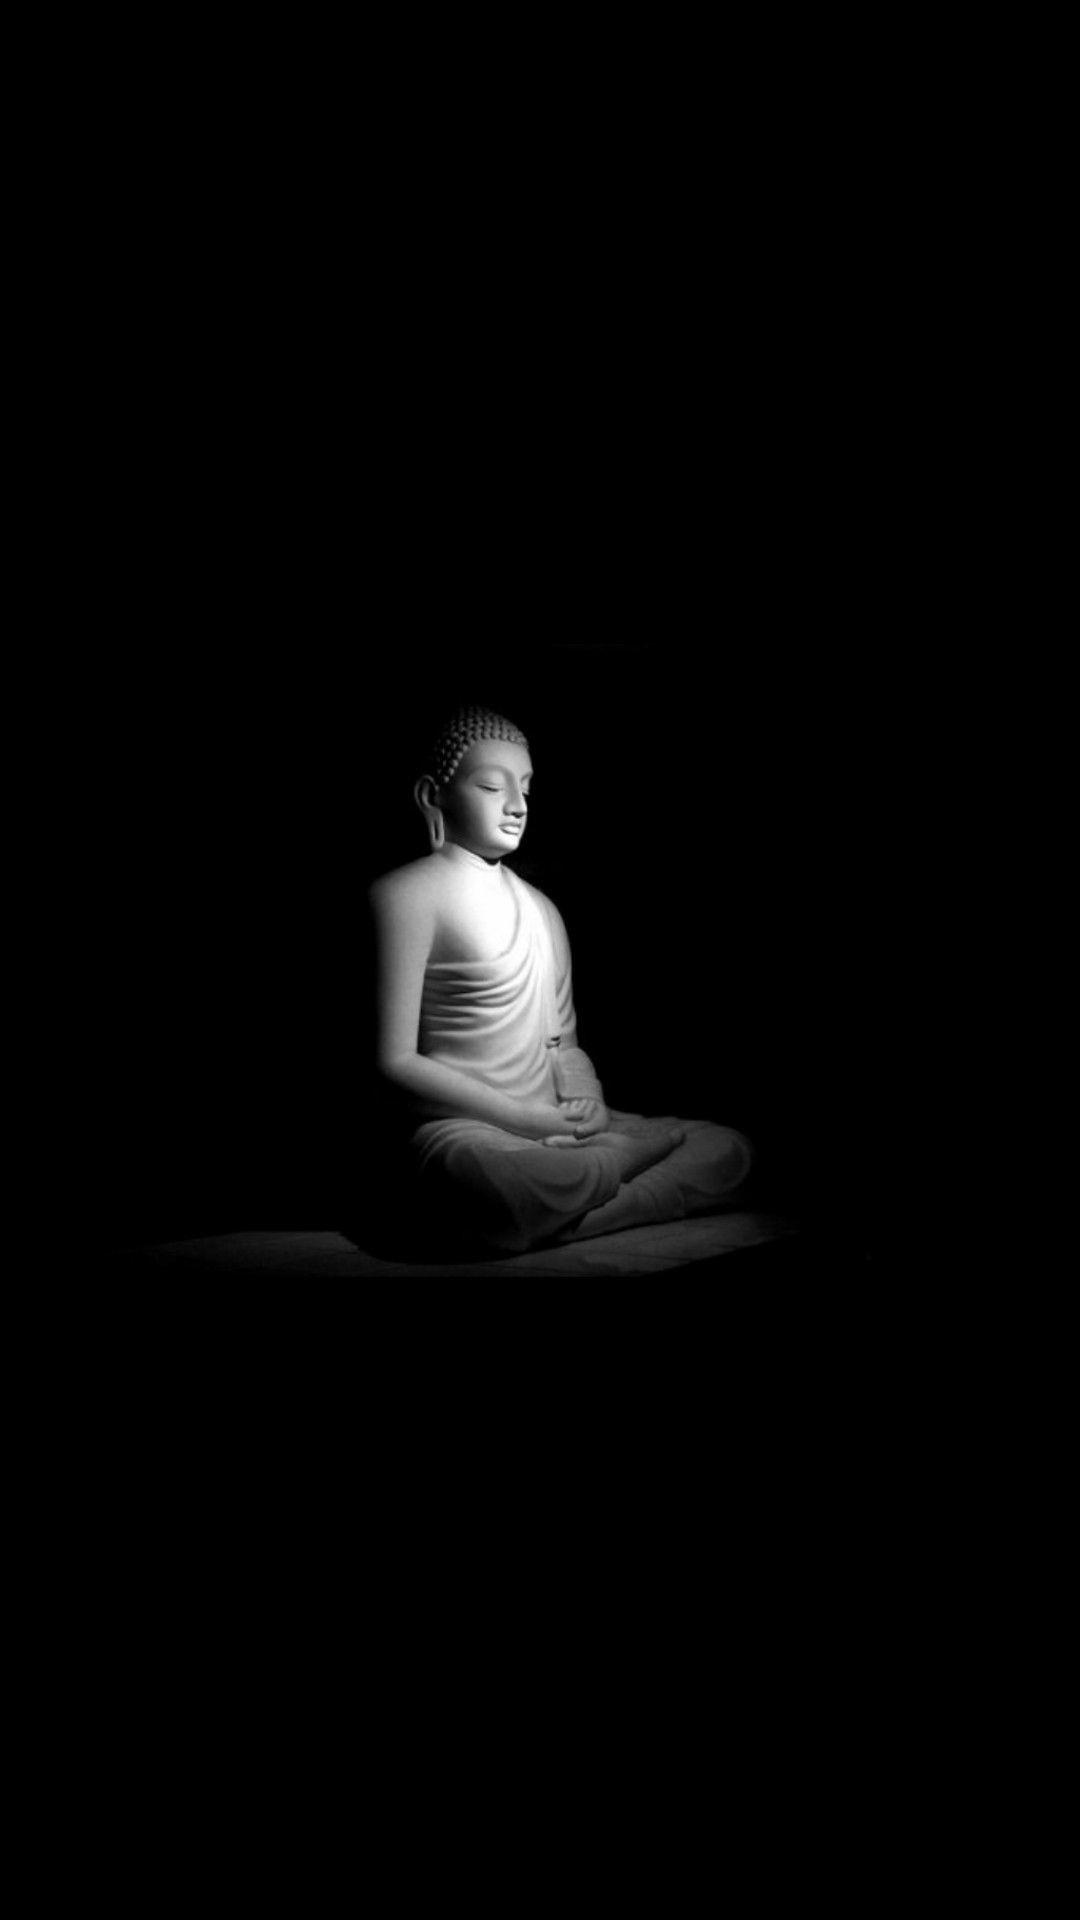 Lord Buddha HD 4k Mobile Wallpapers - Wallpaper Cave